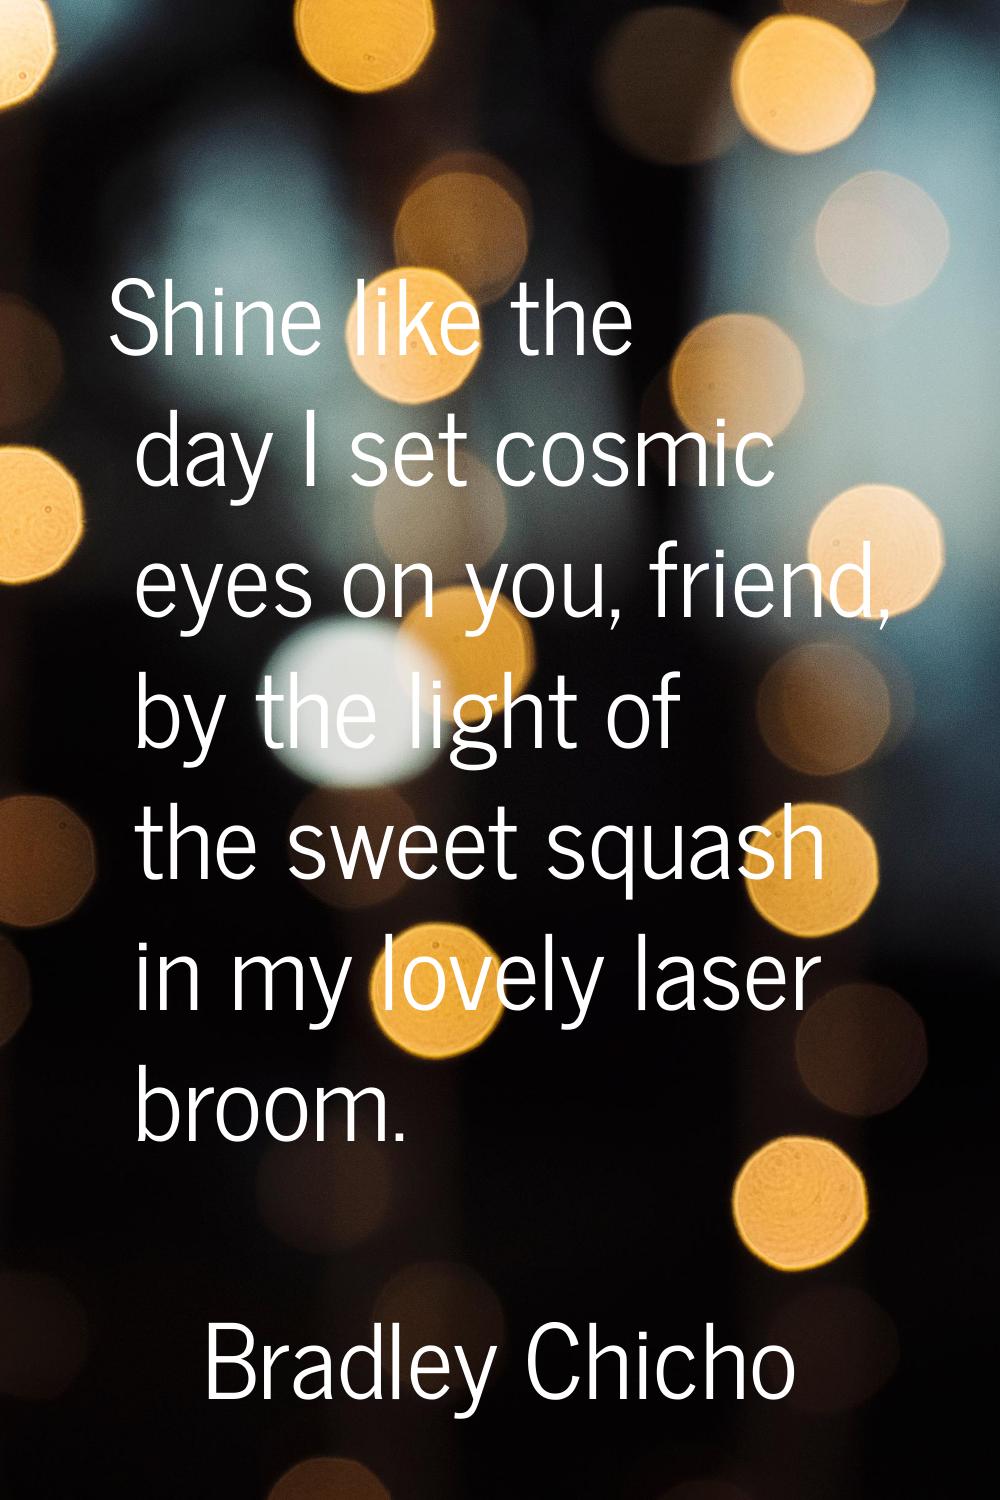 Shine like the day I set cosmic eyes on you, friend, by the light of the sweet squash in my lovely 